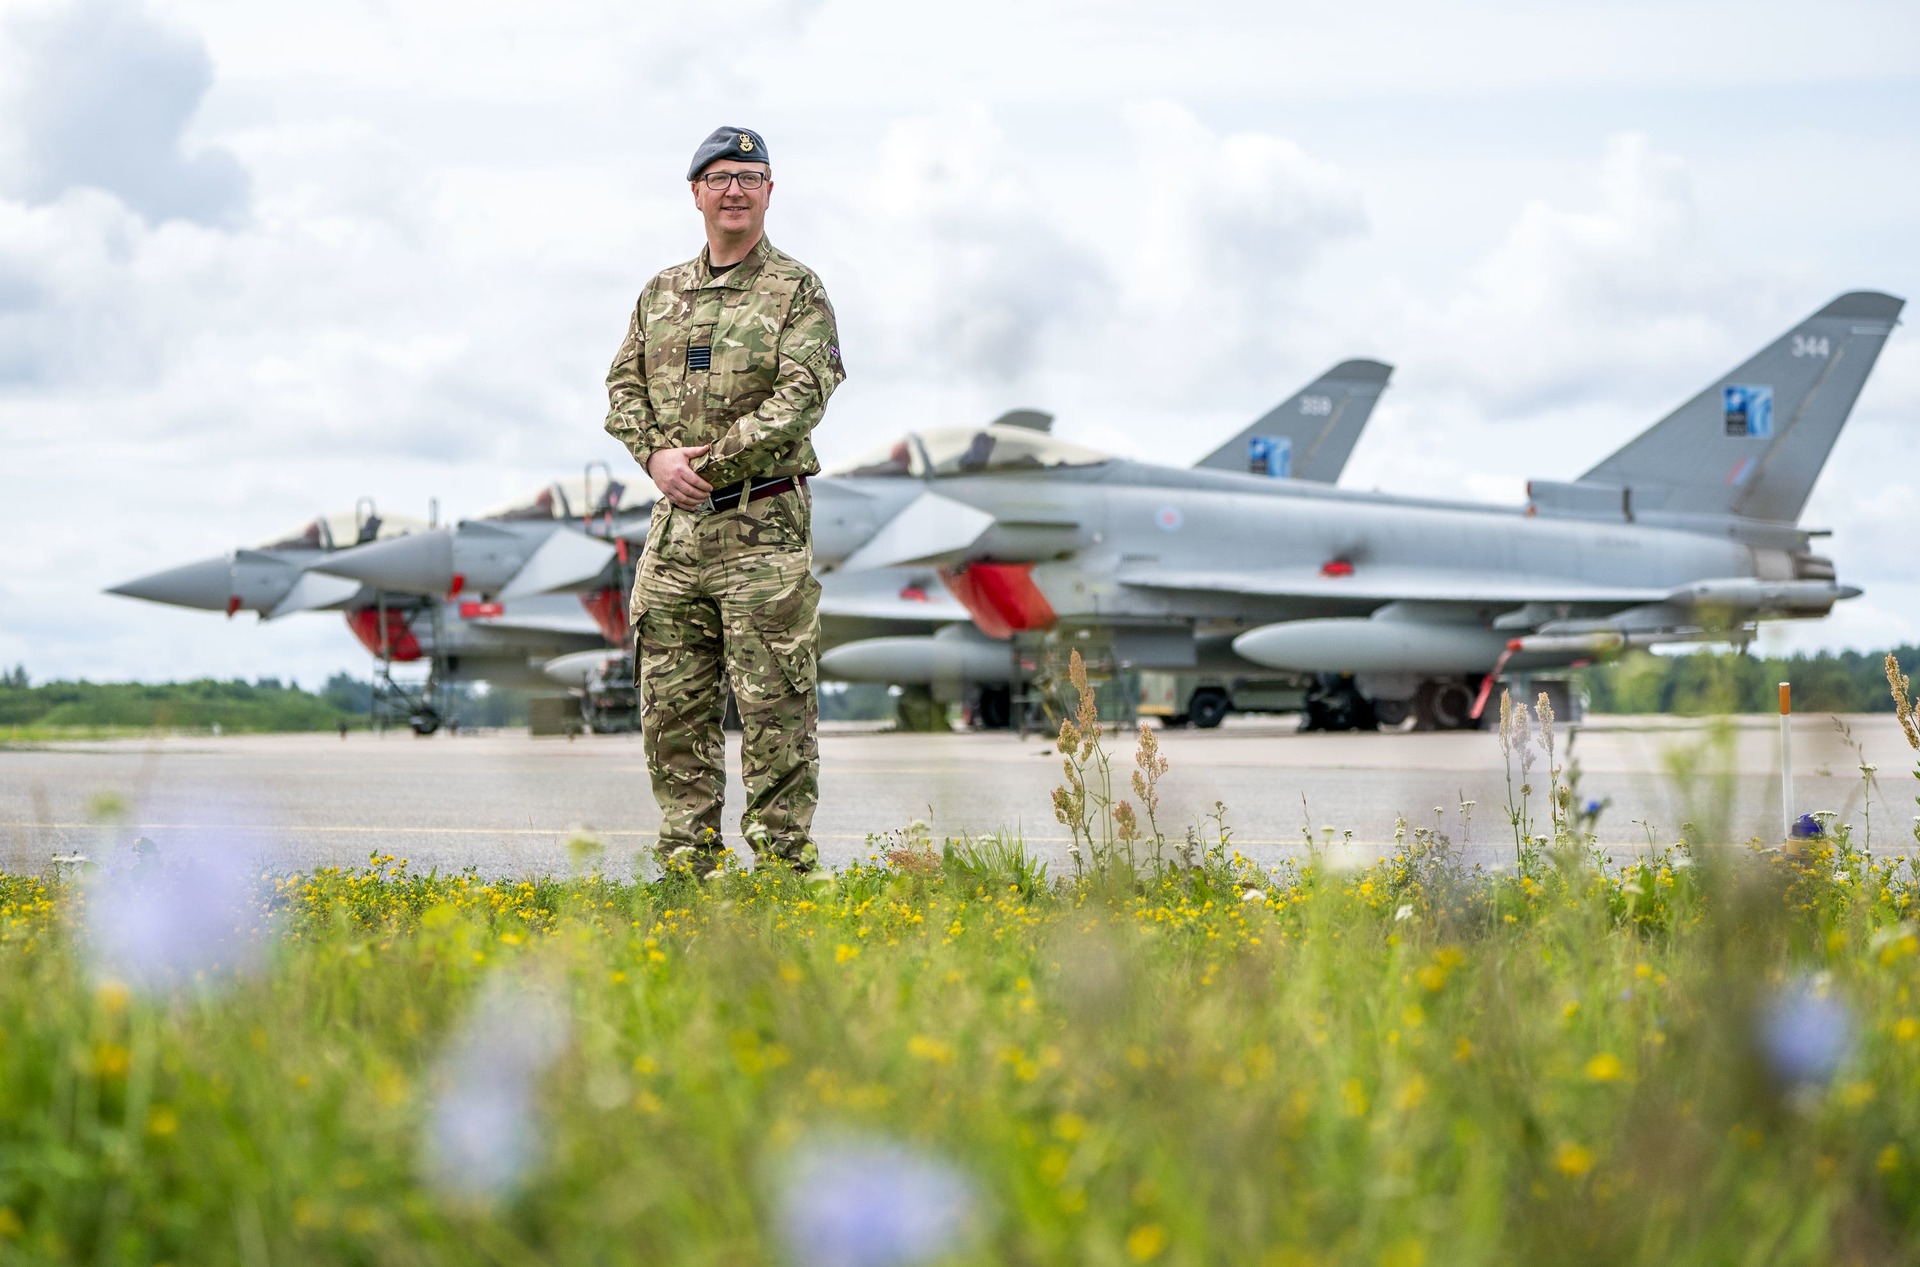 Wing Commander Scott McColl is in charge of the Royal Air Force’s 140 Expeditionary Air Wing at the Amari Airbase in Estonia